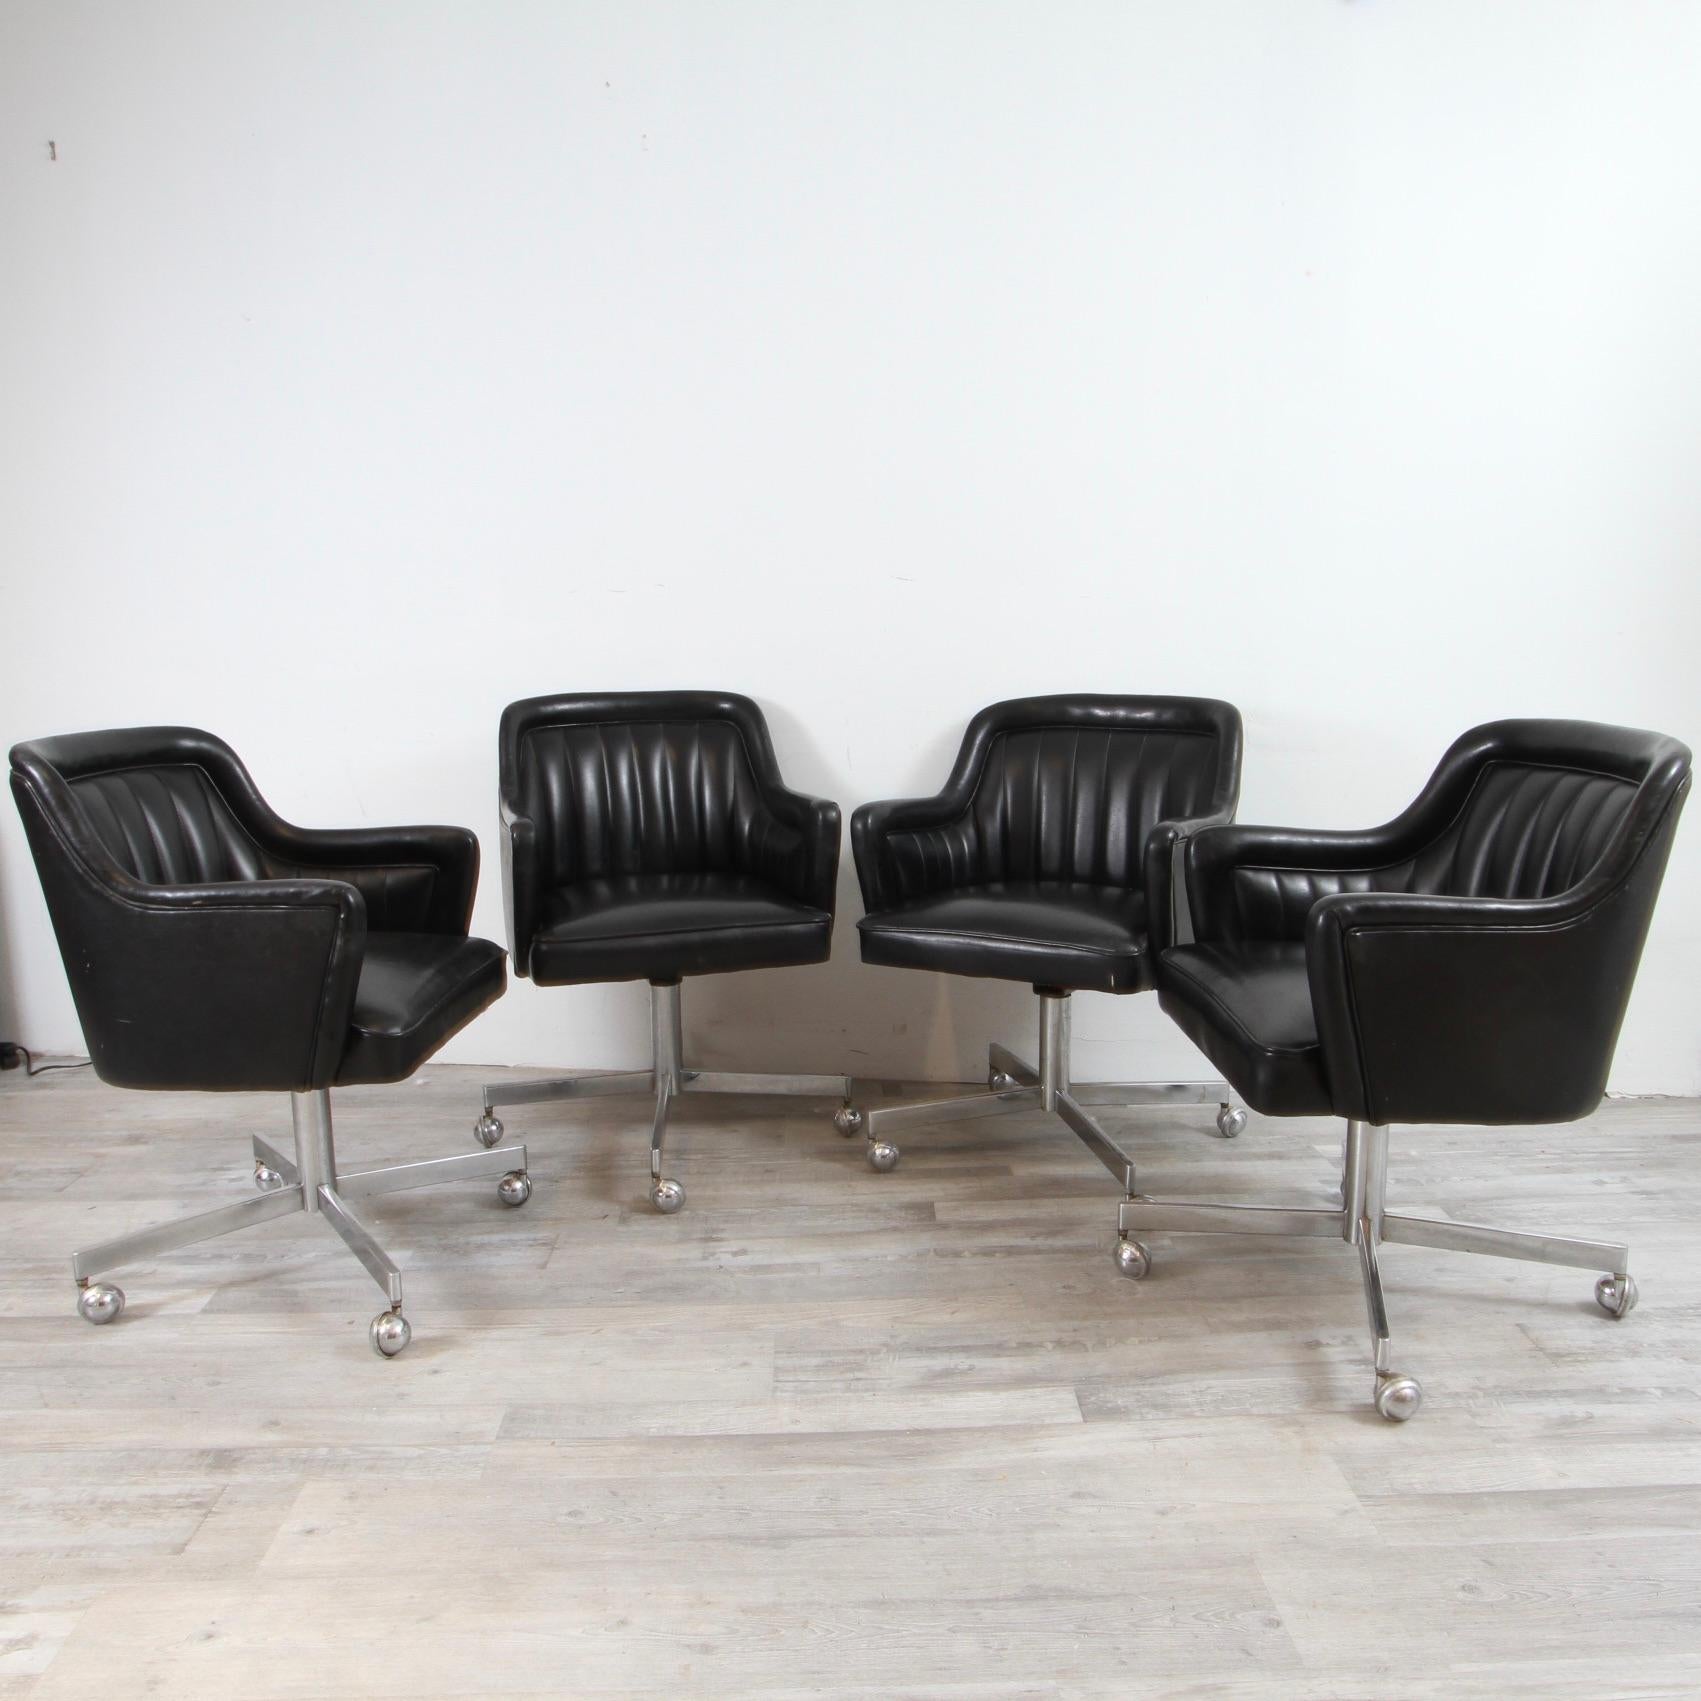 Nice surviving set of channel black desk chairs in original black naugahyde with chrome castors. We have 8 in total. All presentable as is, but in need of reupholstery after 50 years. 

Ward Bennett, November 17, 1917 – August 13, 2003) was an